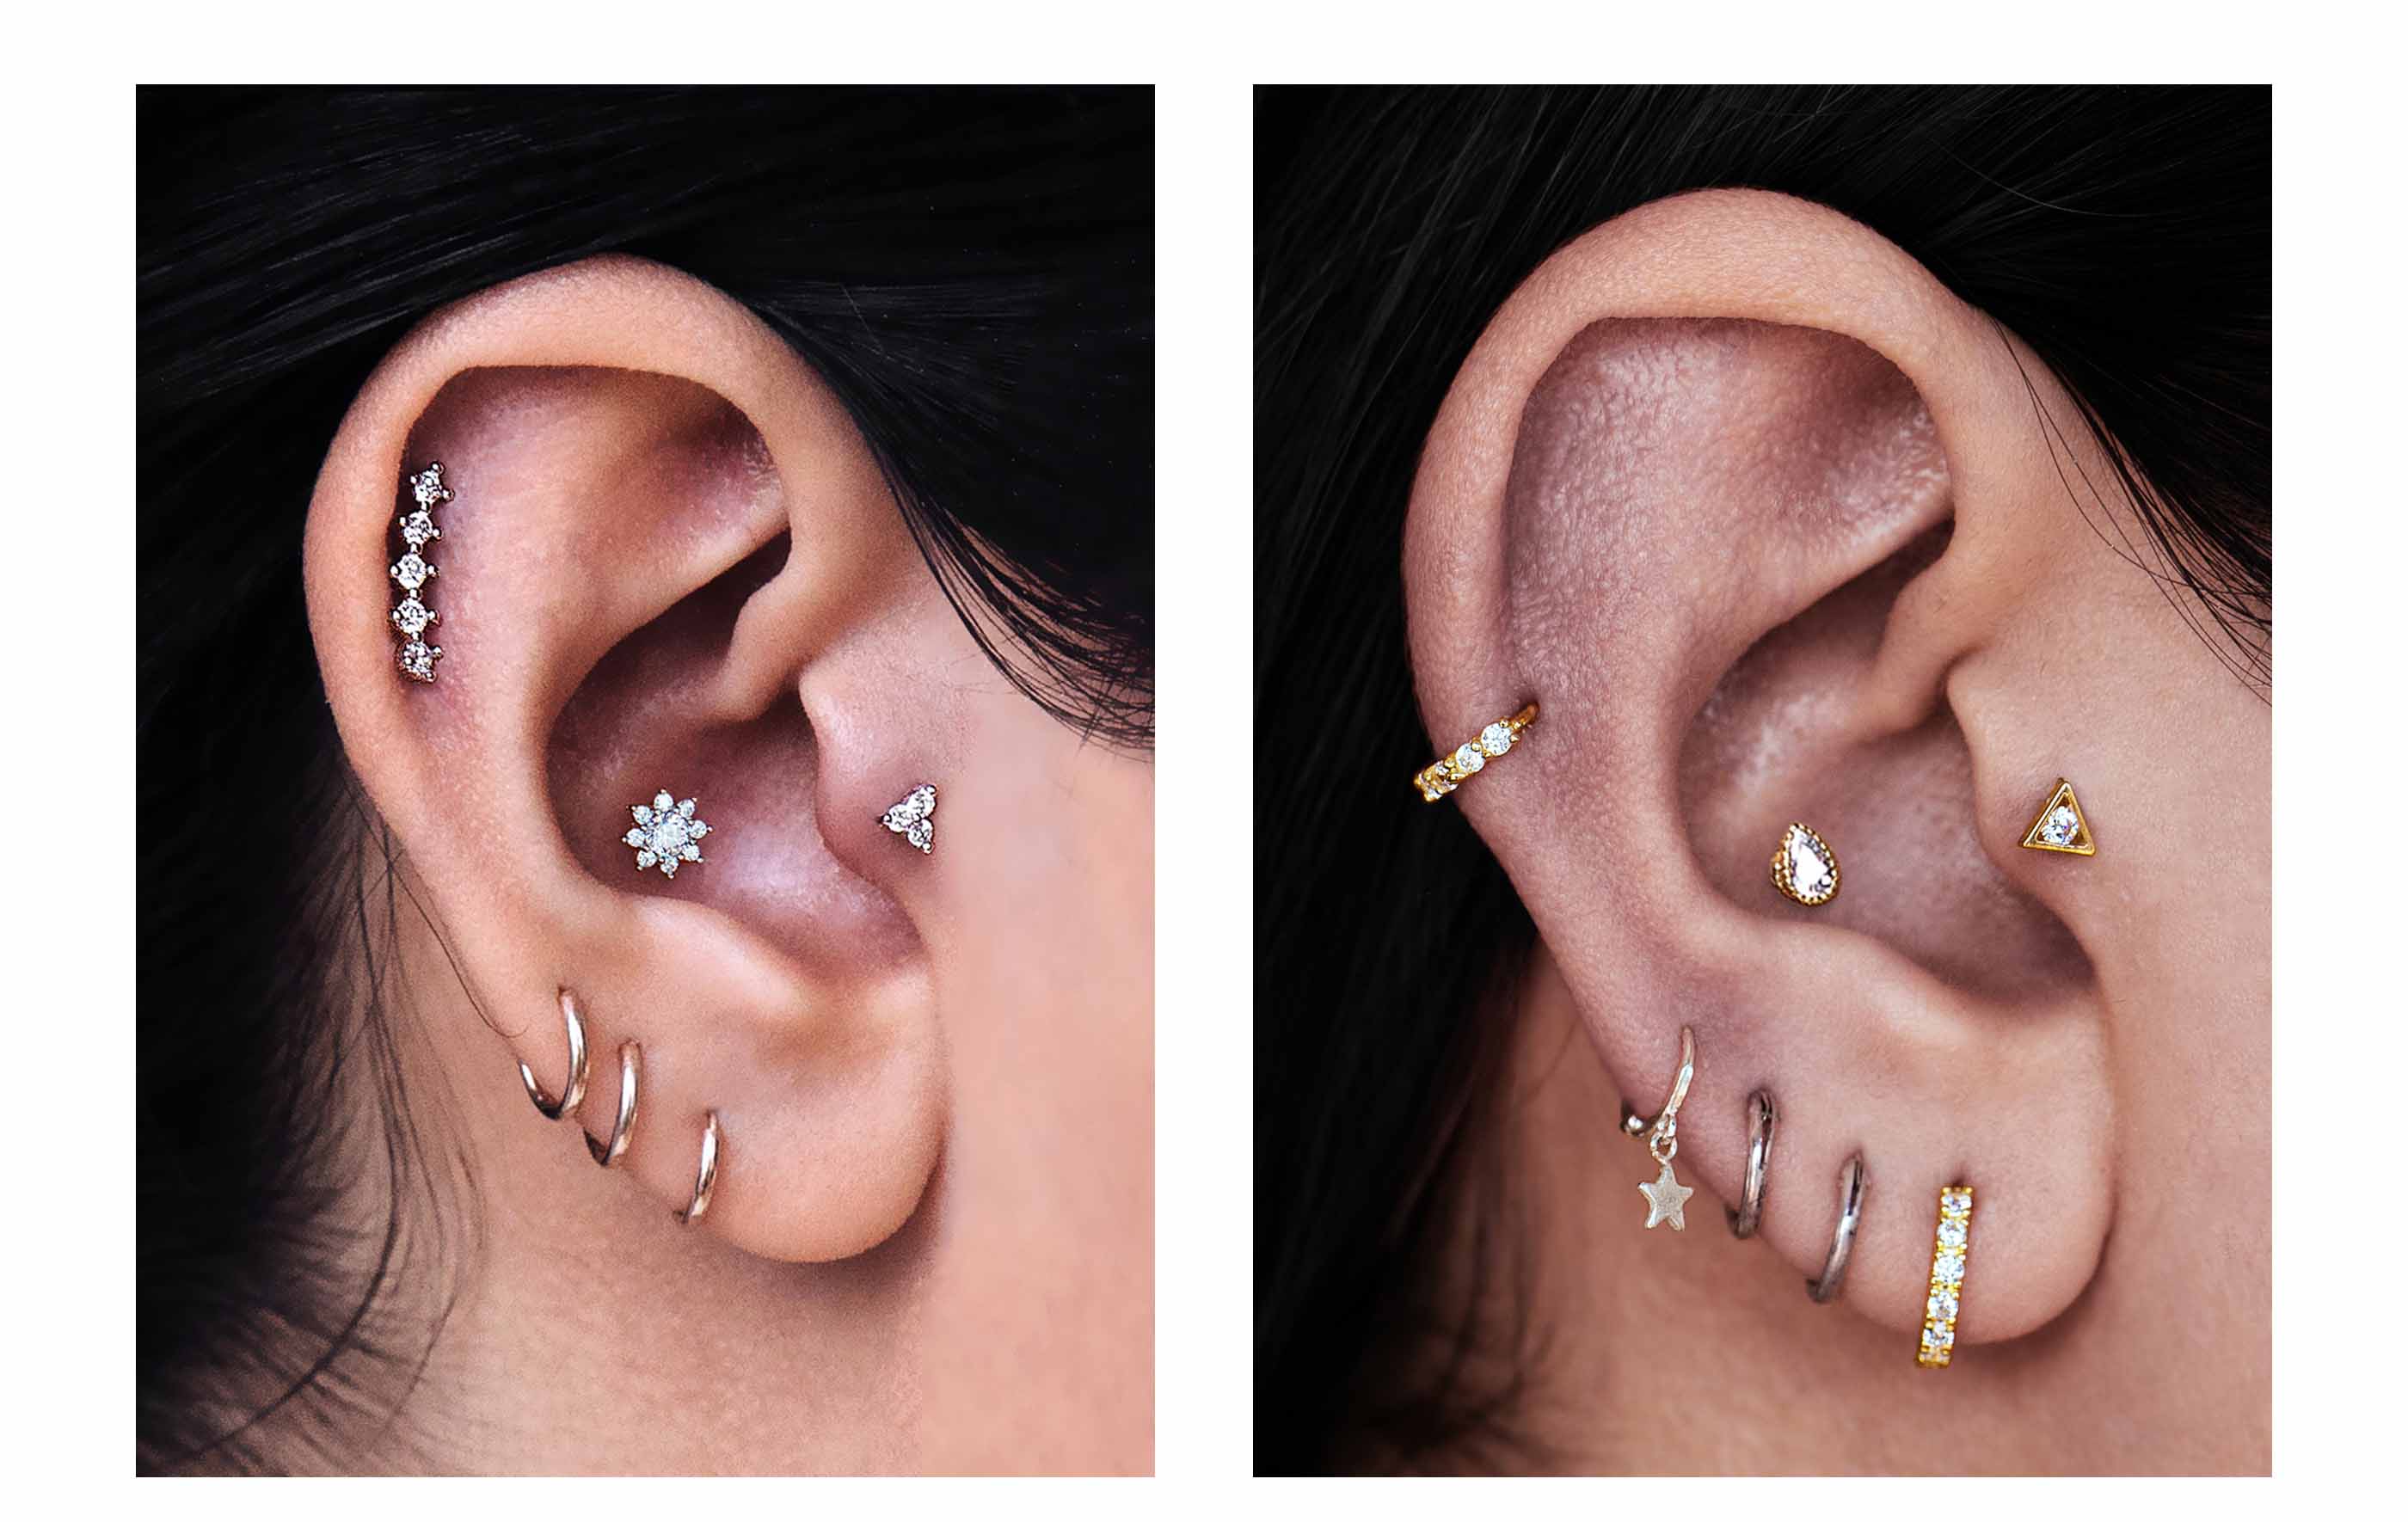 What Is A Conch Piercing